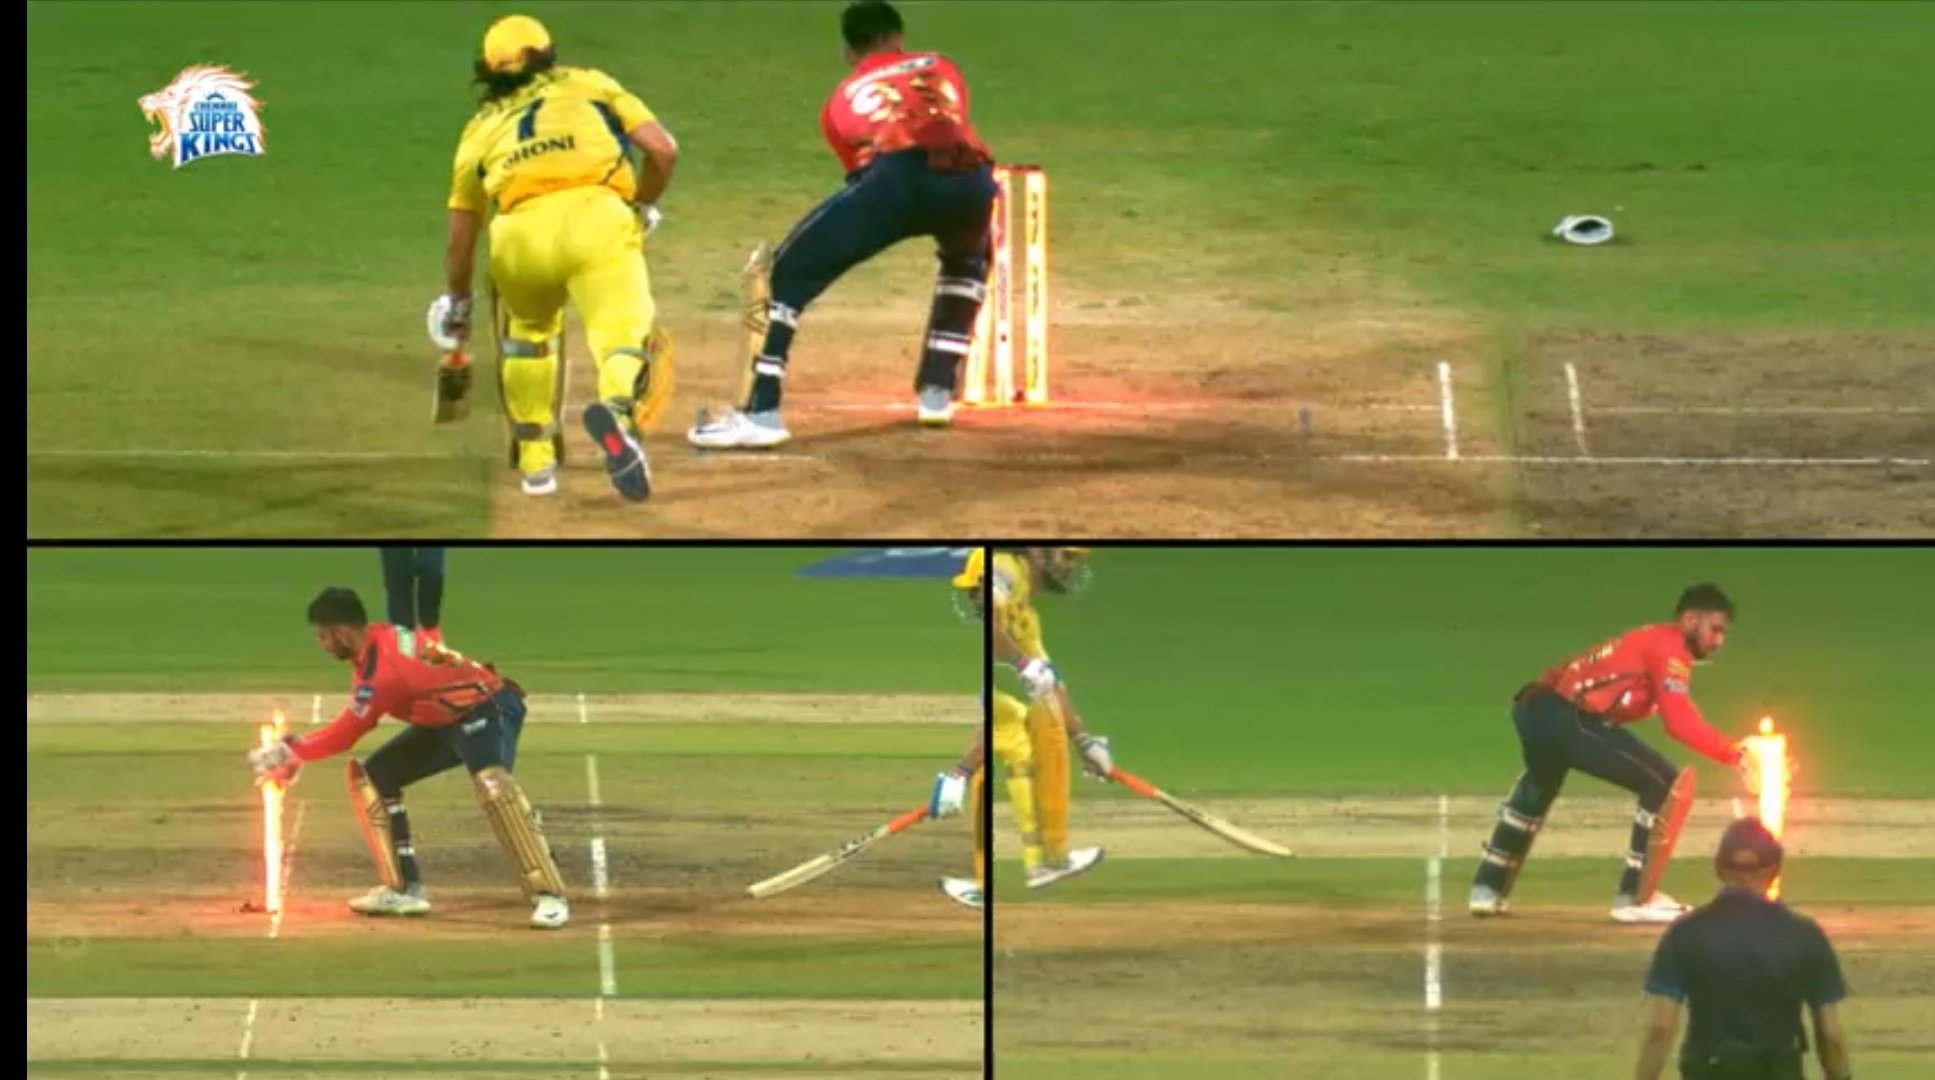 PBKS' Viral Post: 'Thala For A Reason' on MS Dhoni's Run-Out